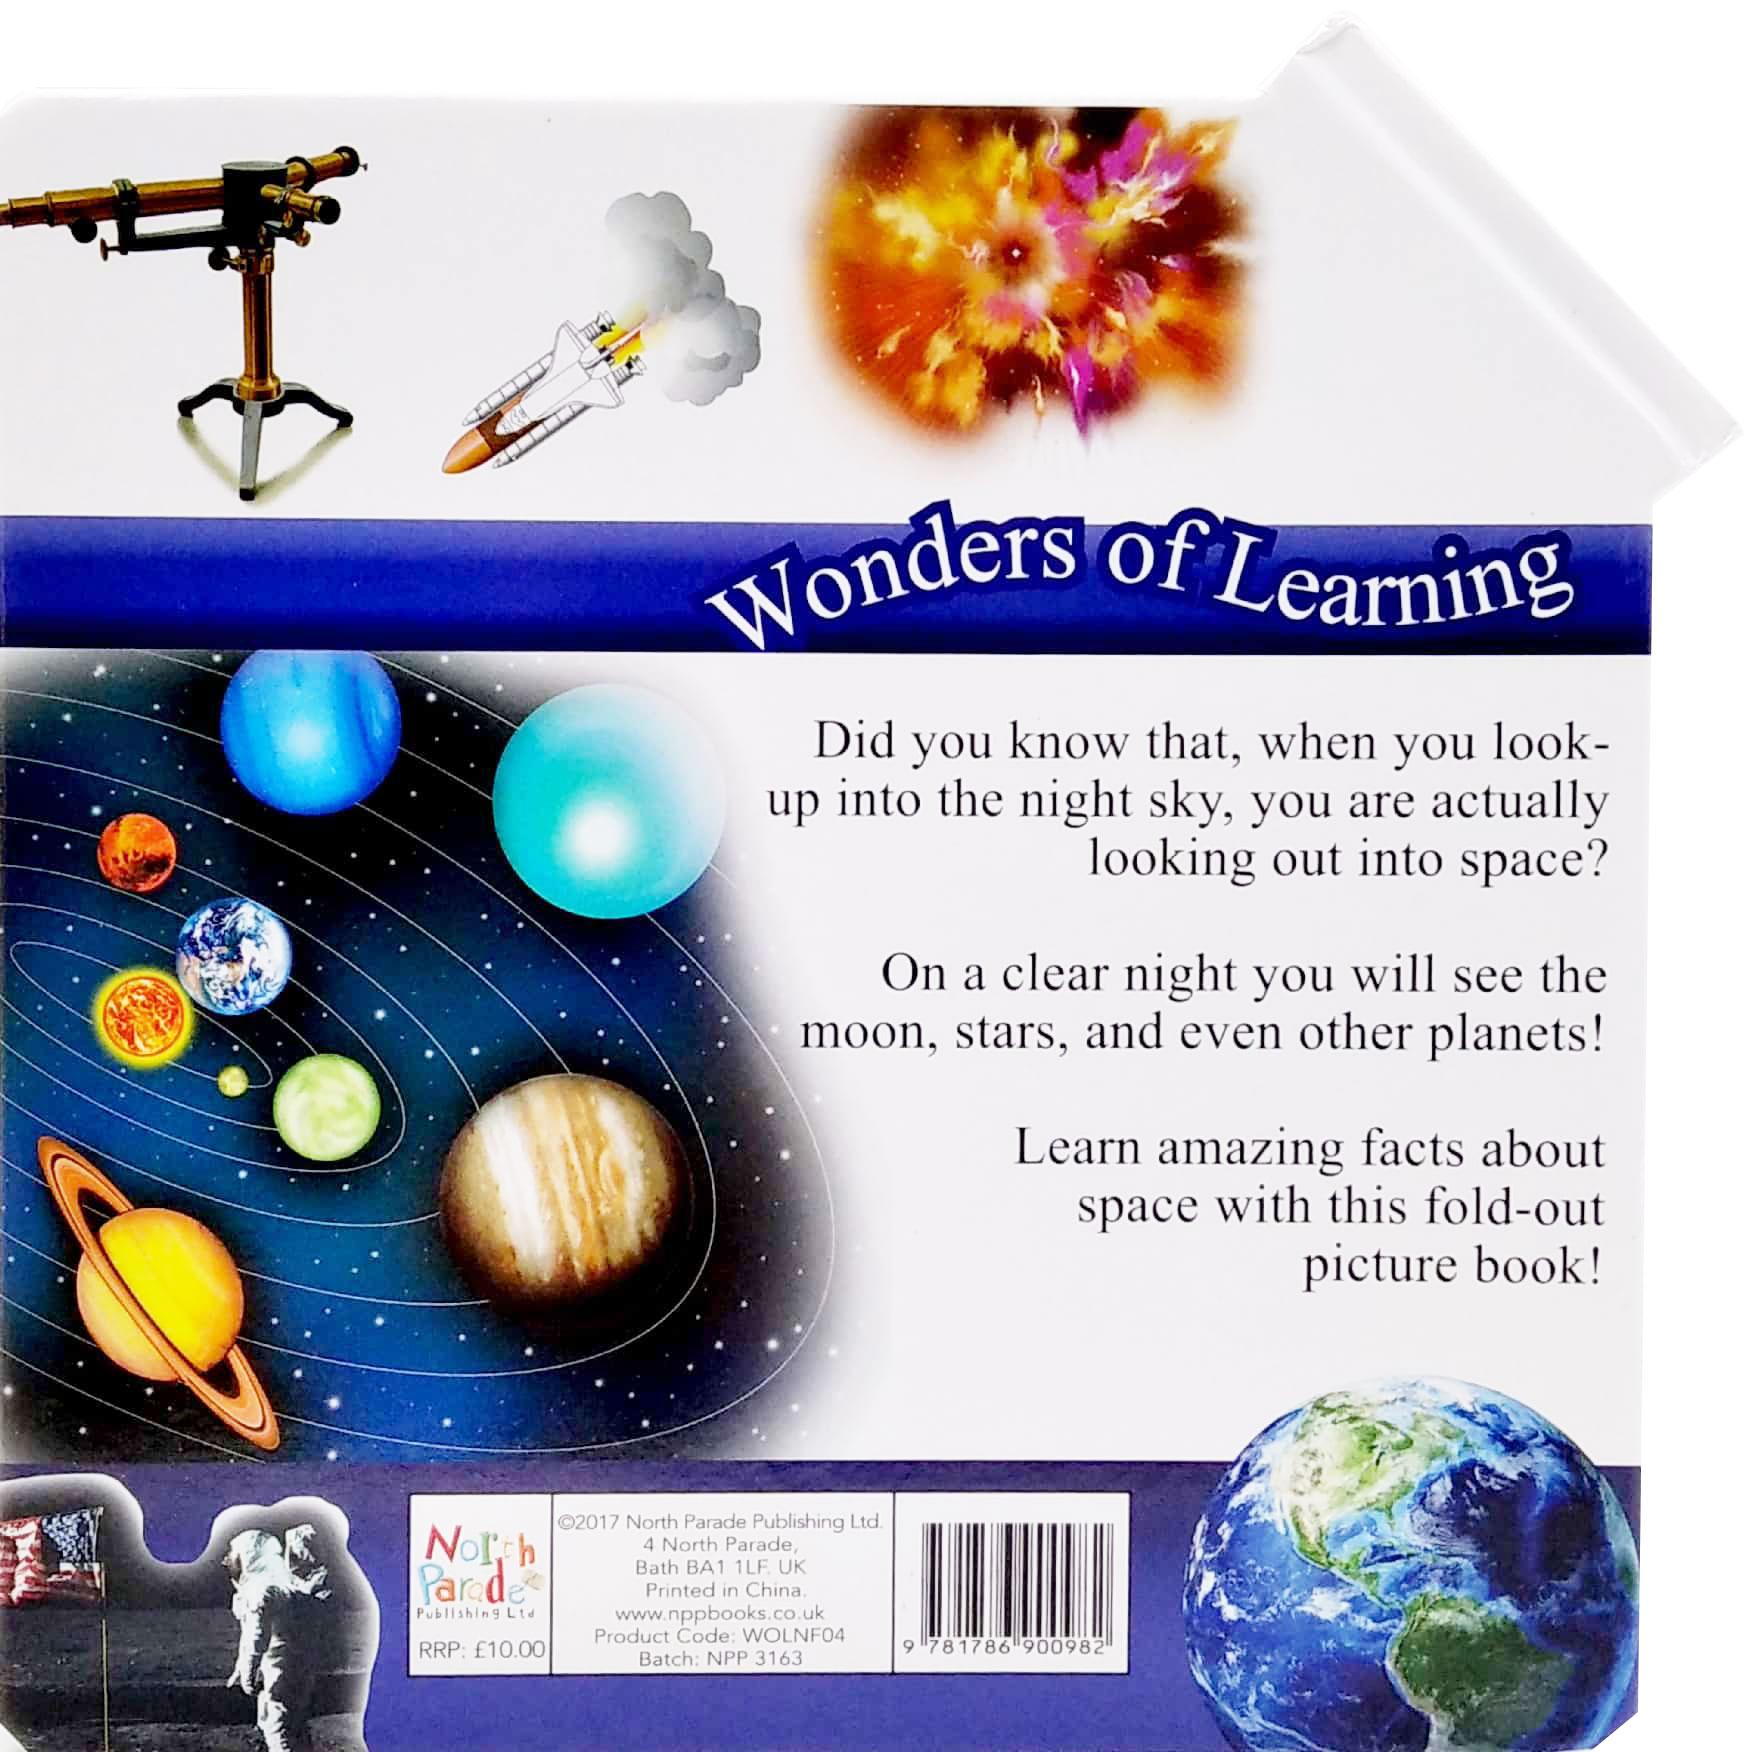 Wonder Of Learning - My Fold-Out Book Of Space